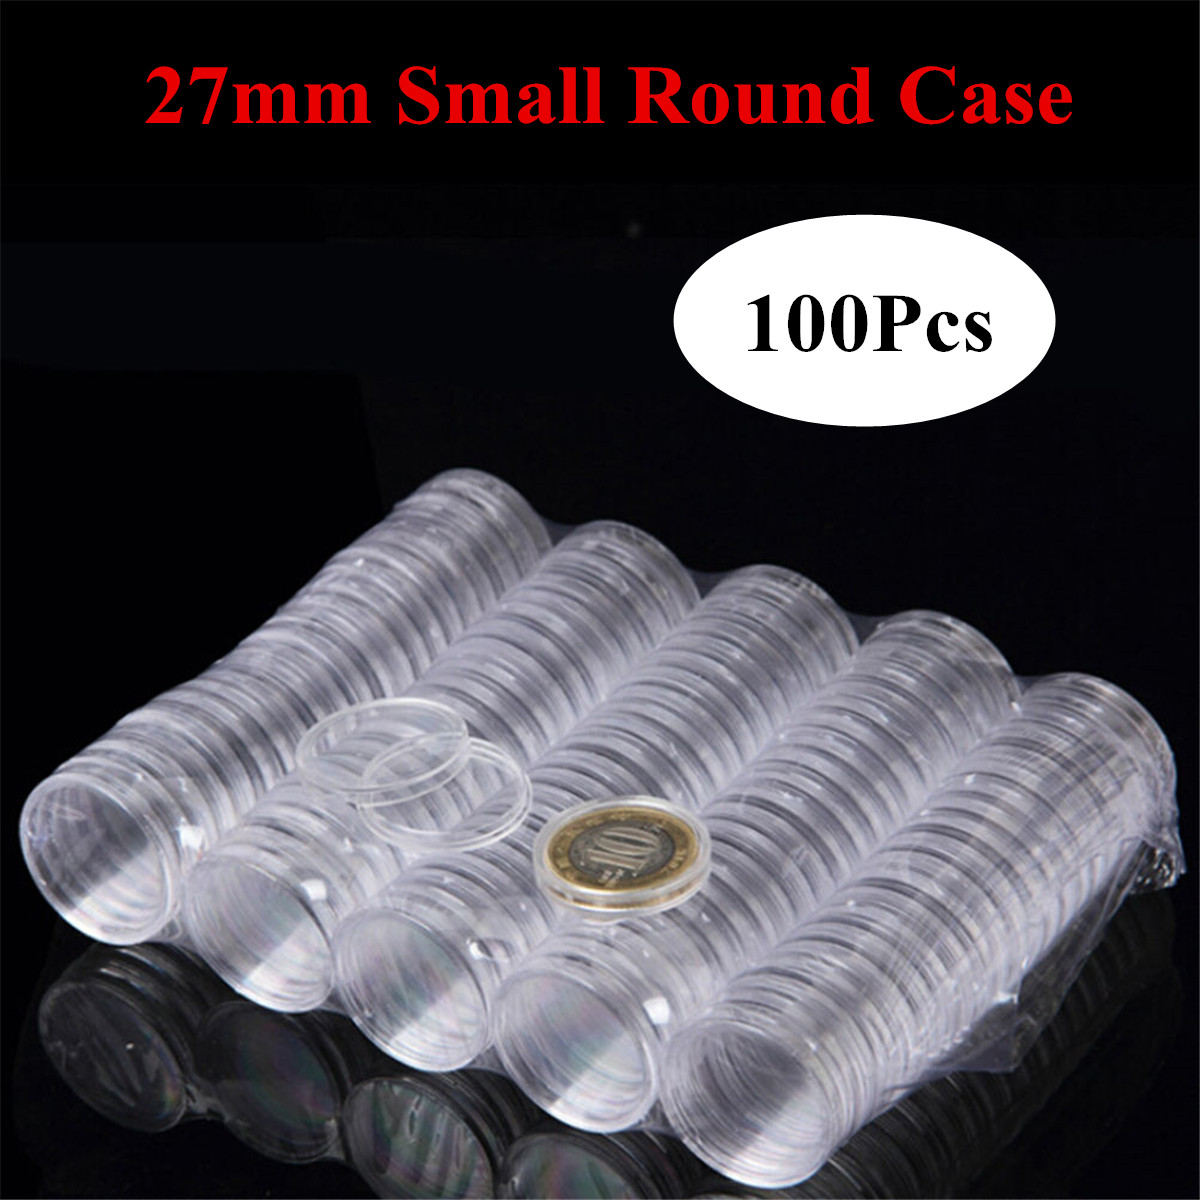 100PCS-27mm-Coin-Storage-Box-Round-Cases-Applied-Clear-Portable-Round-Holder-Box-1345594-2